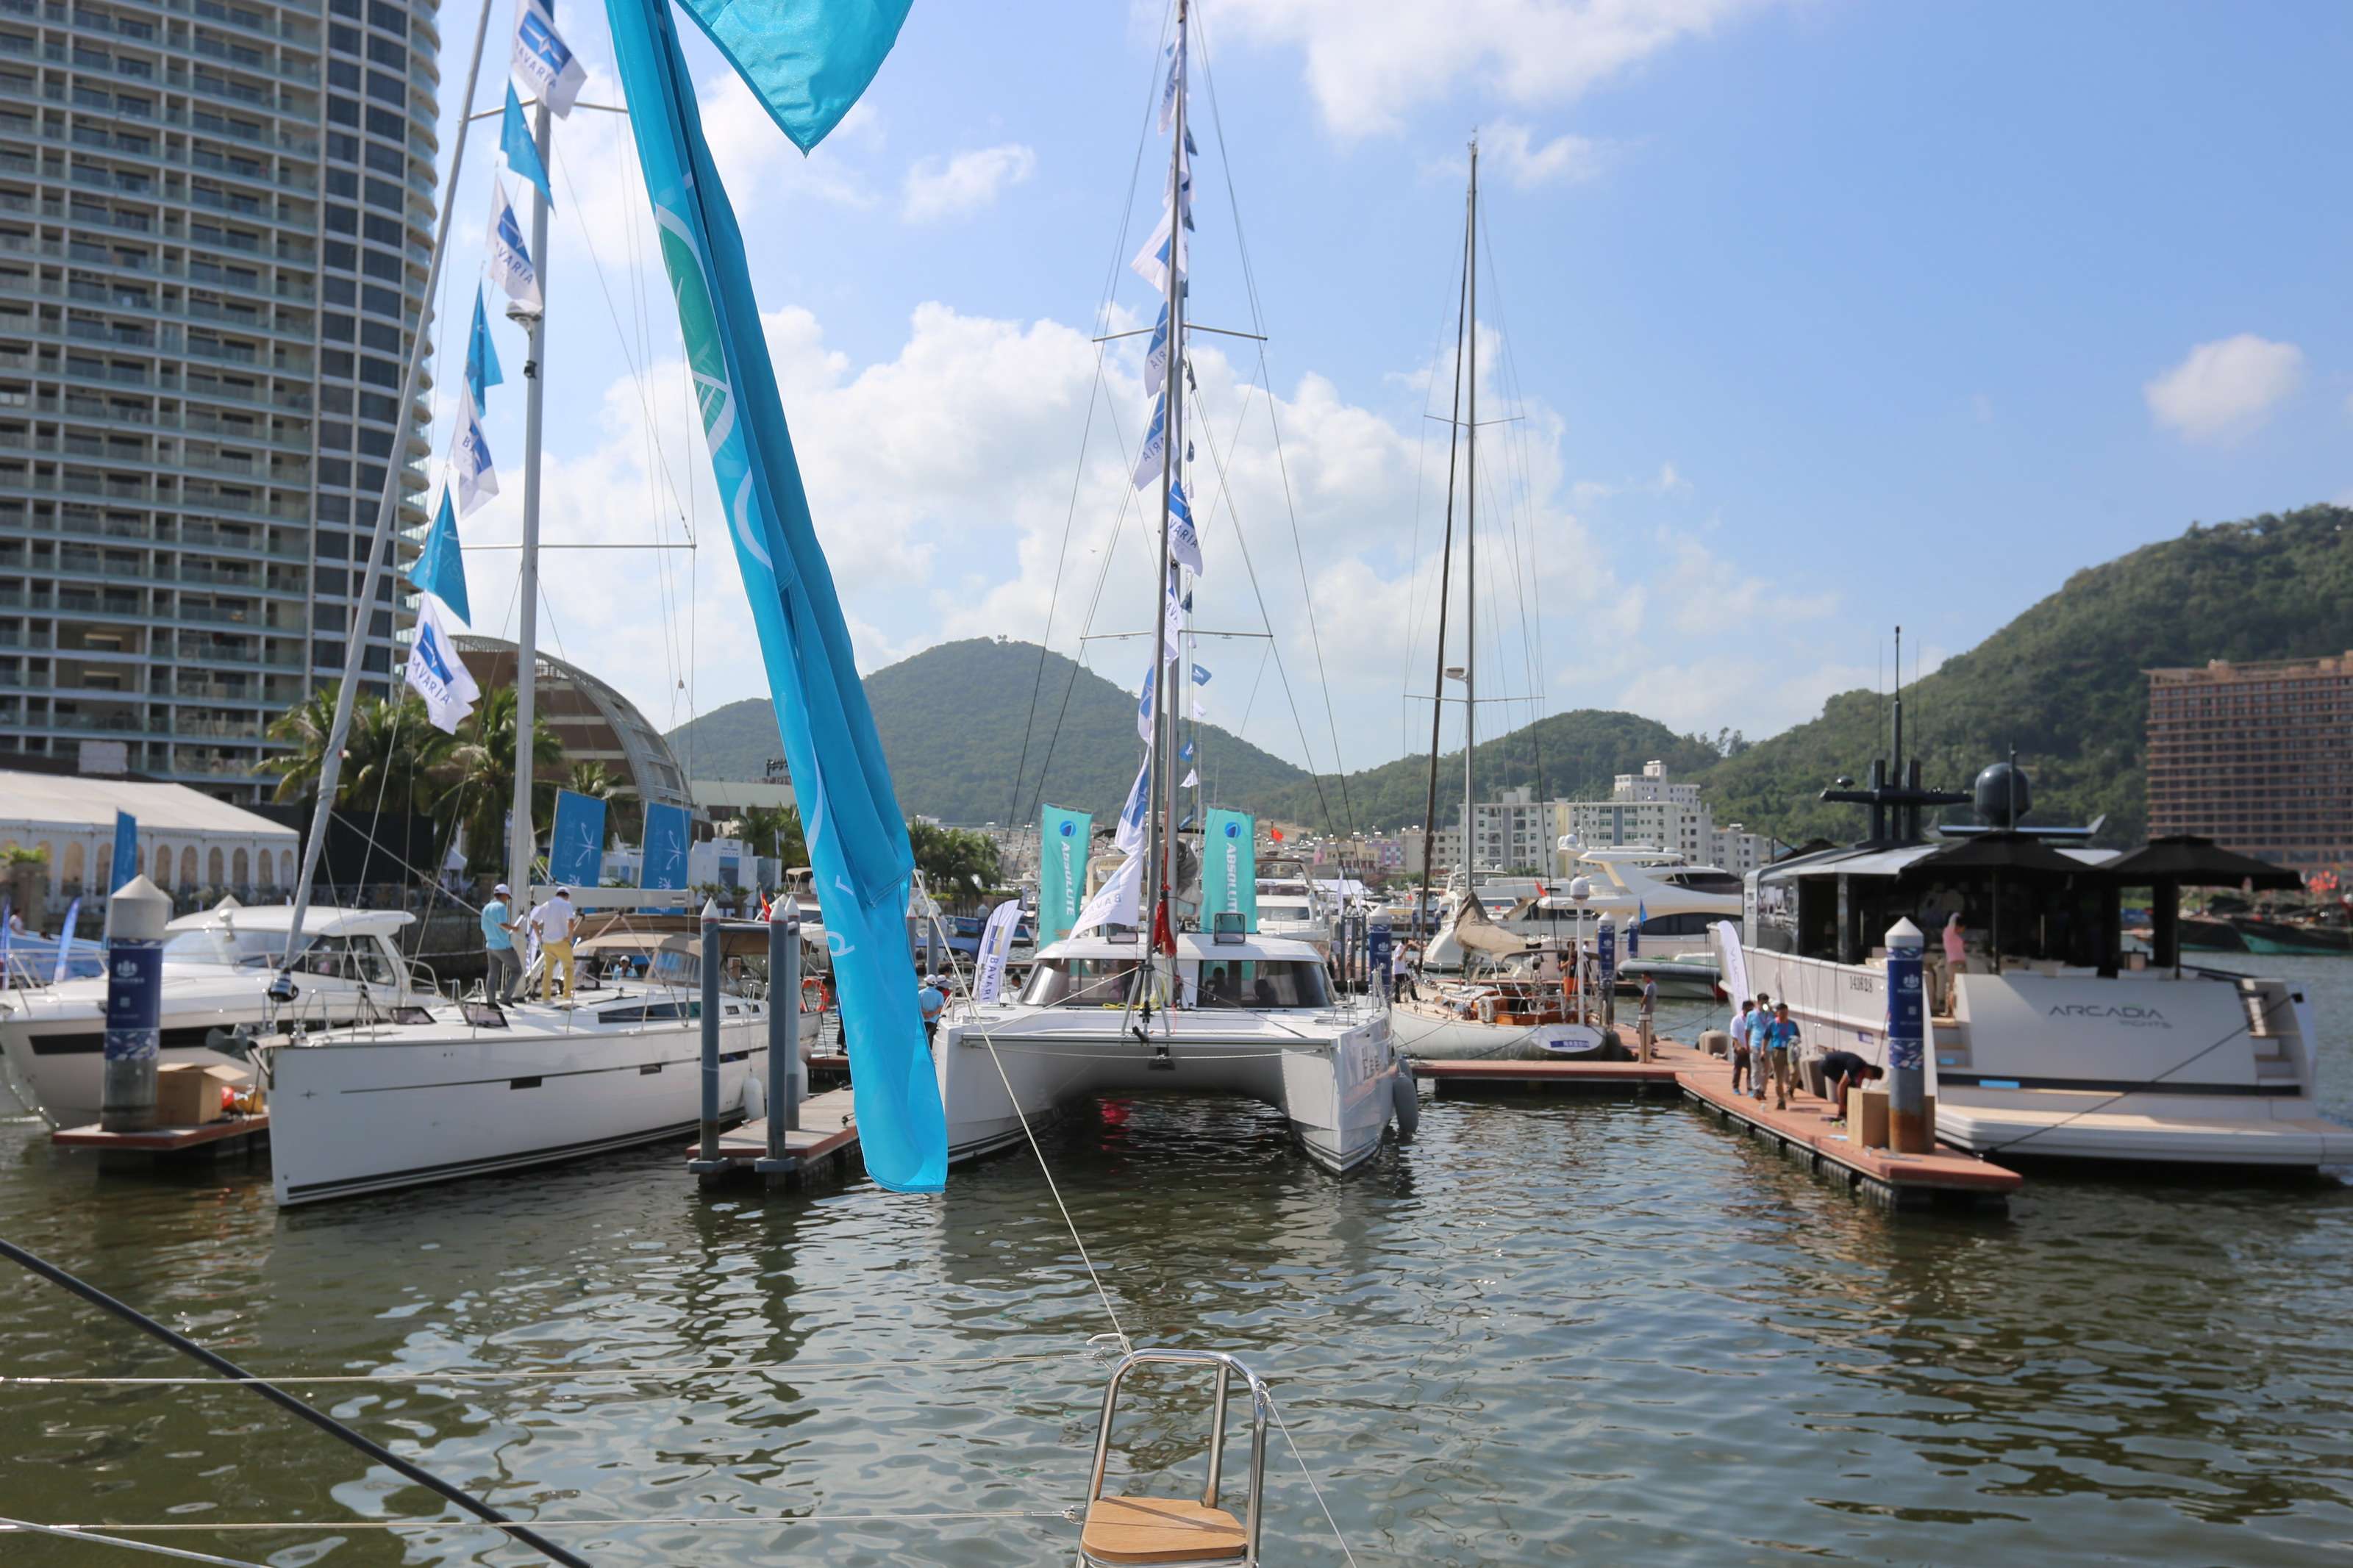 Many people in Hainan are keen to rent out a yacht for a special event, be it for social or business purposes. Photo: ImagineChina